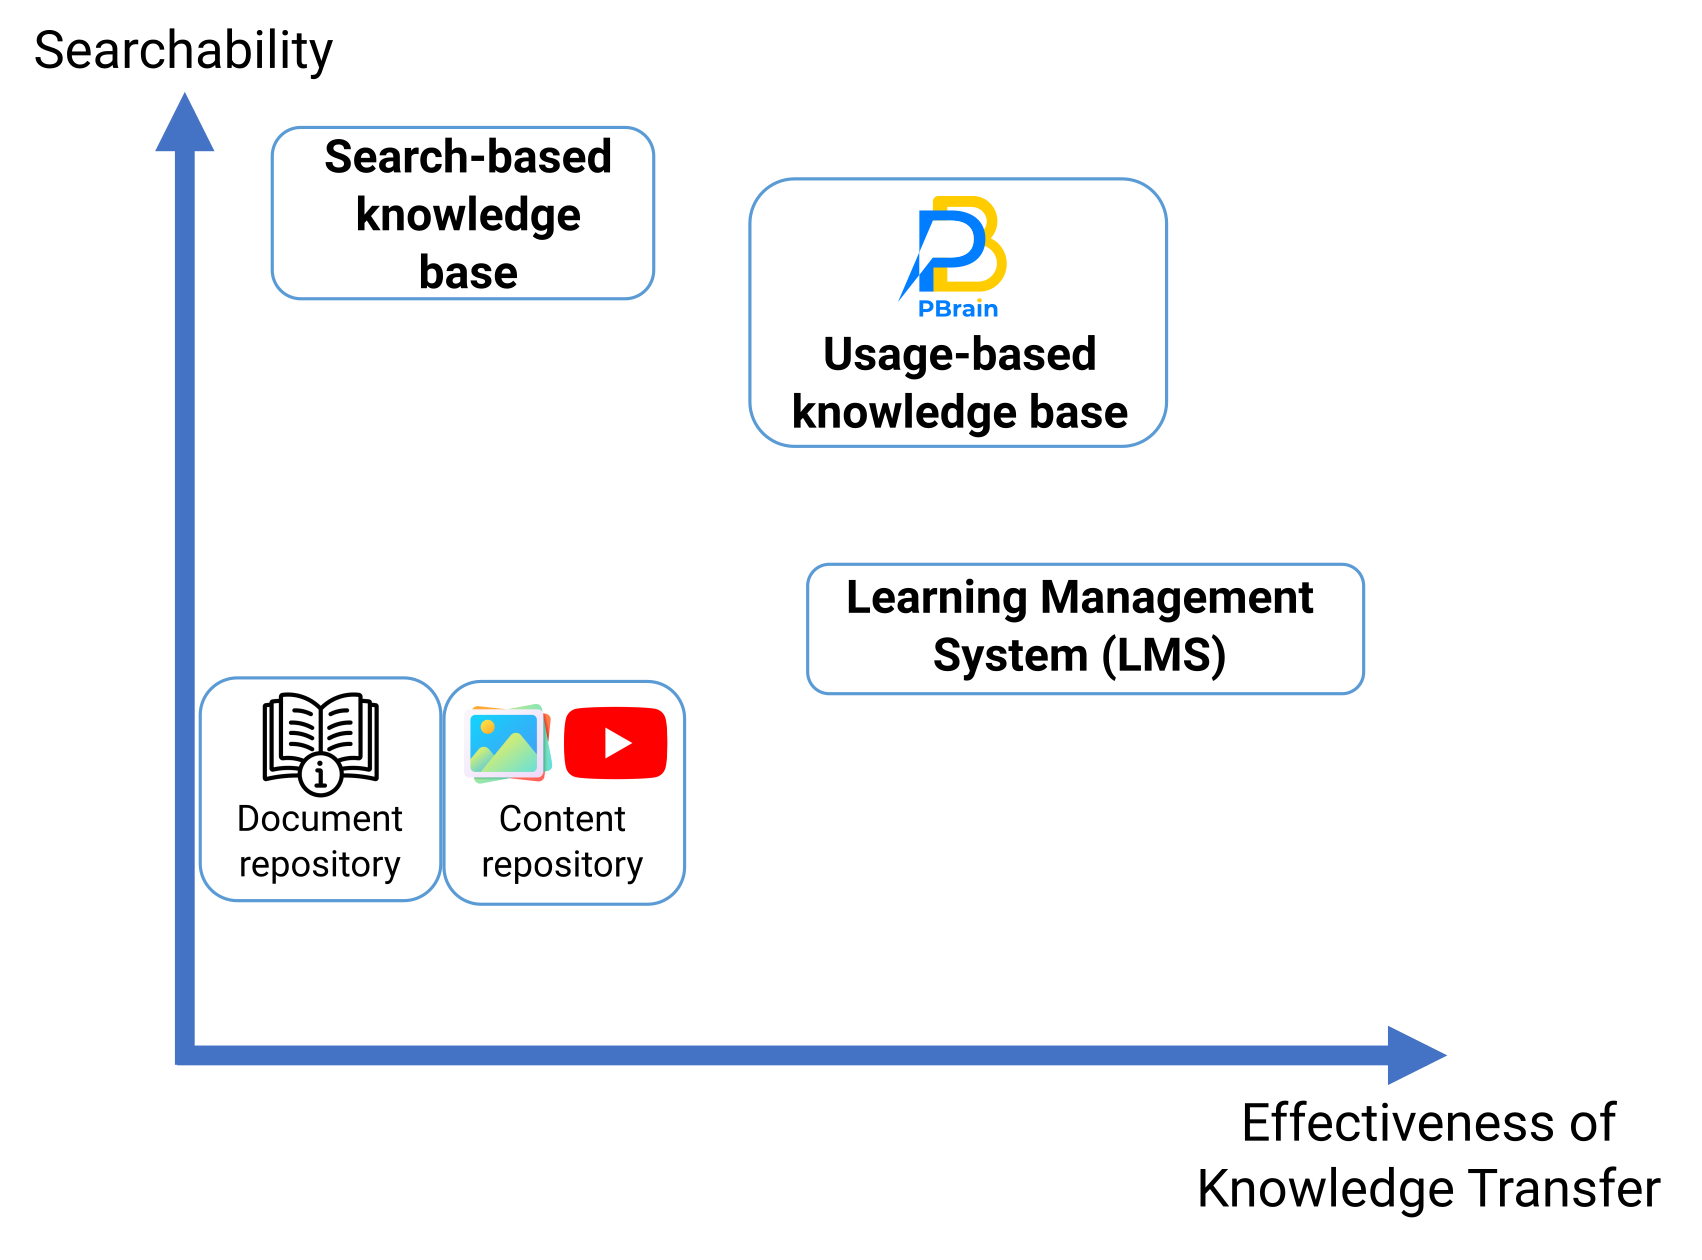 Knowledge transfer tools, comparing searchability and effectiveness of knowledge transfer